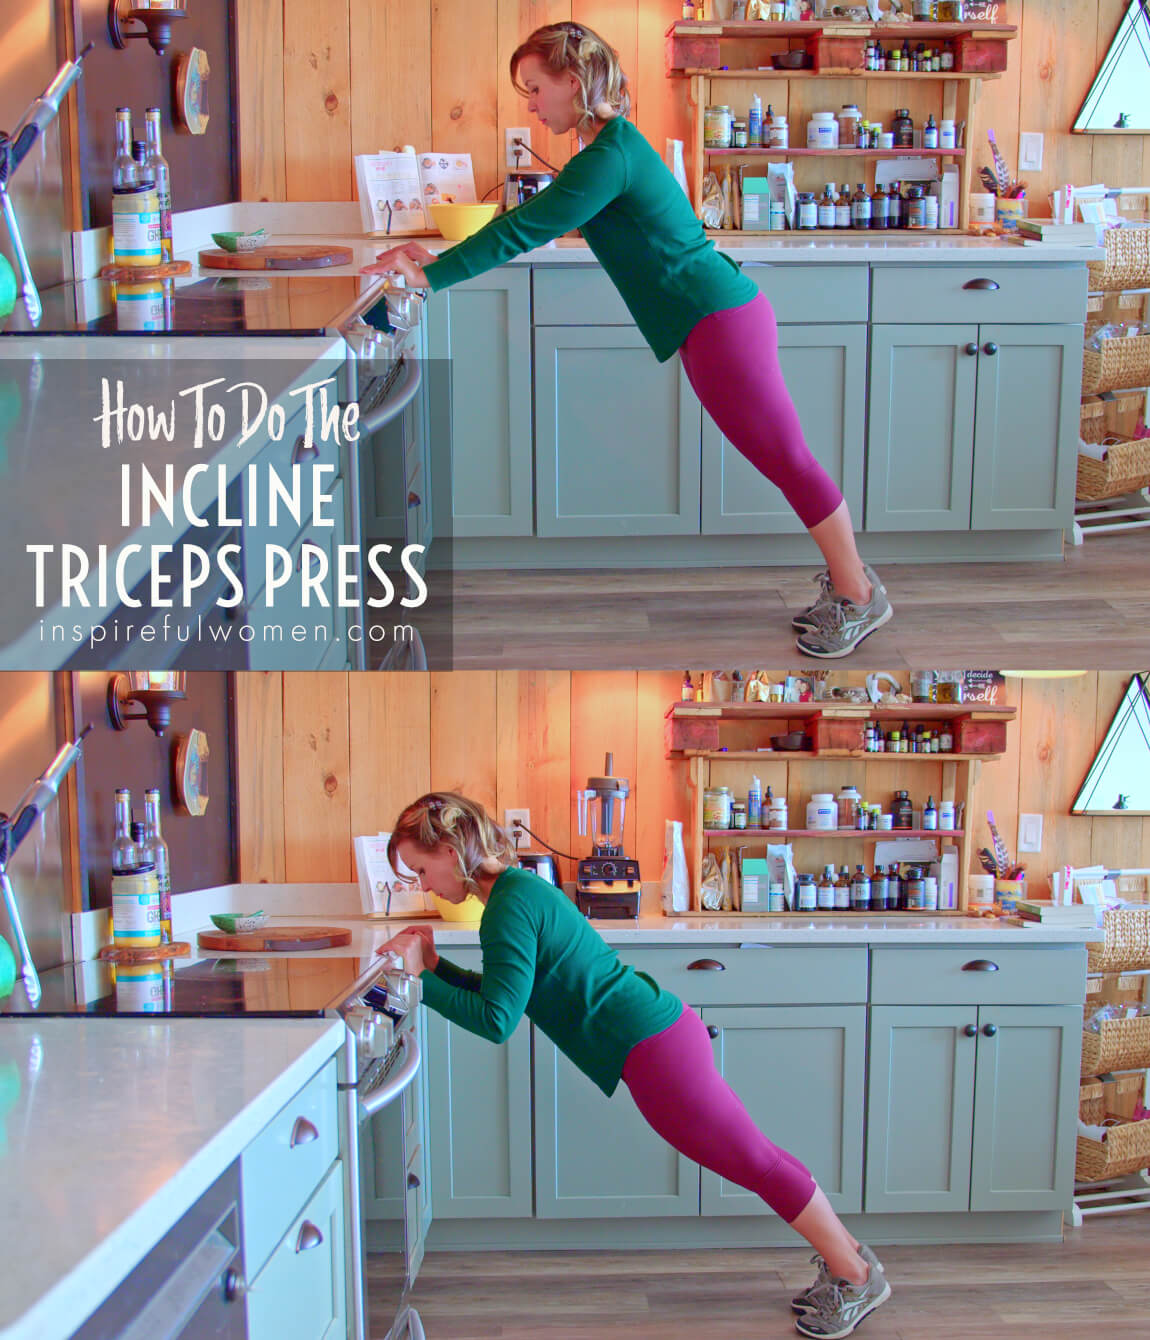 how-to-incline-triceps-press-extension-bodyweight-arm-exercise-at-home-proper-form